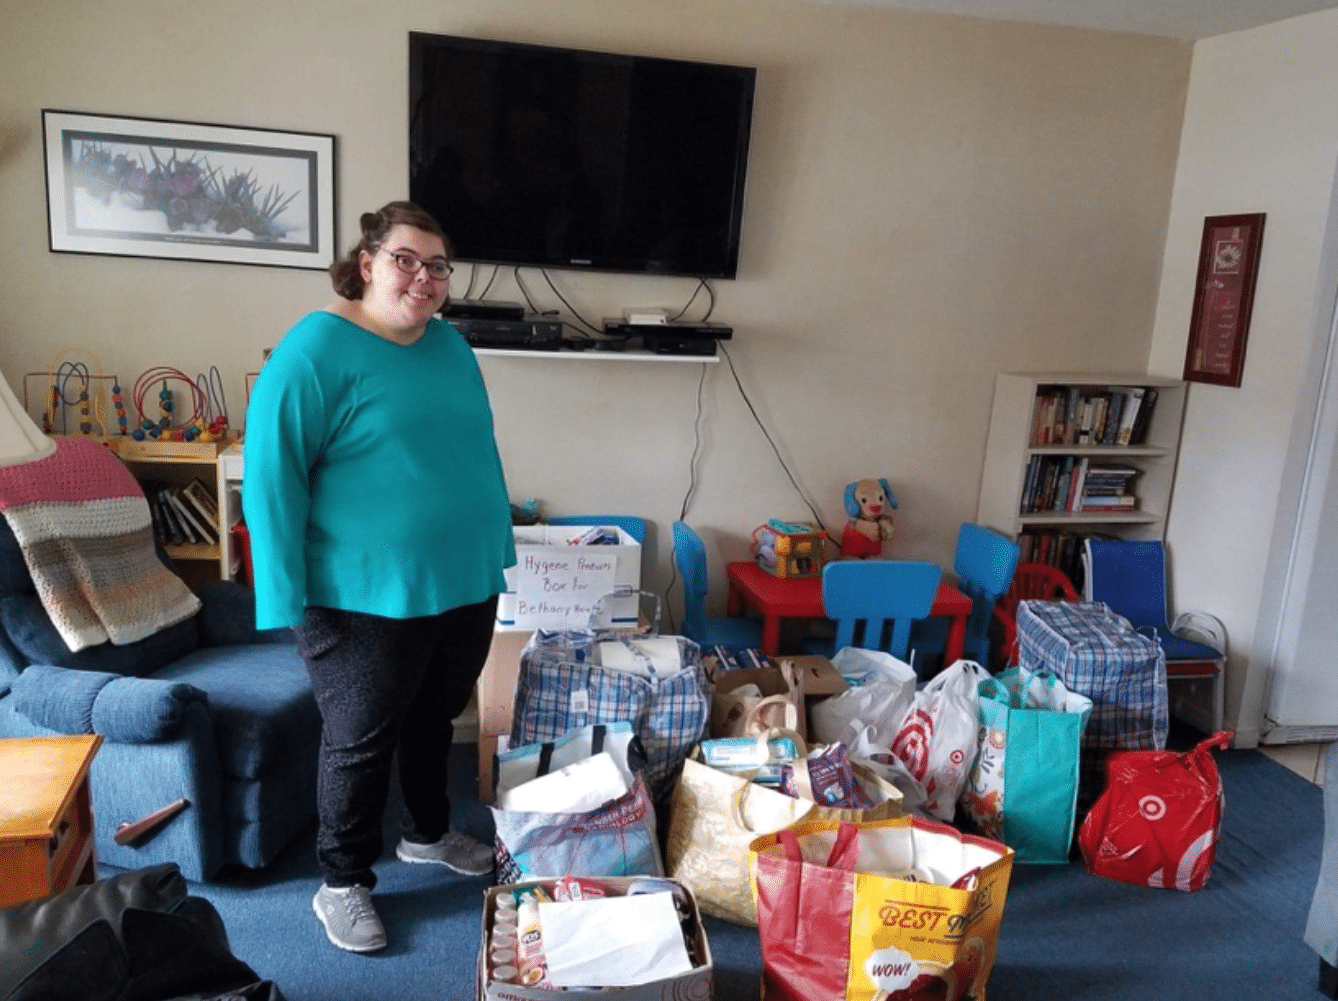 Amanda Brosnan stands next to bags of donations to support Bethany House, a local non-profit